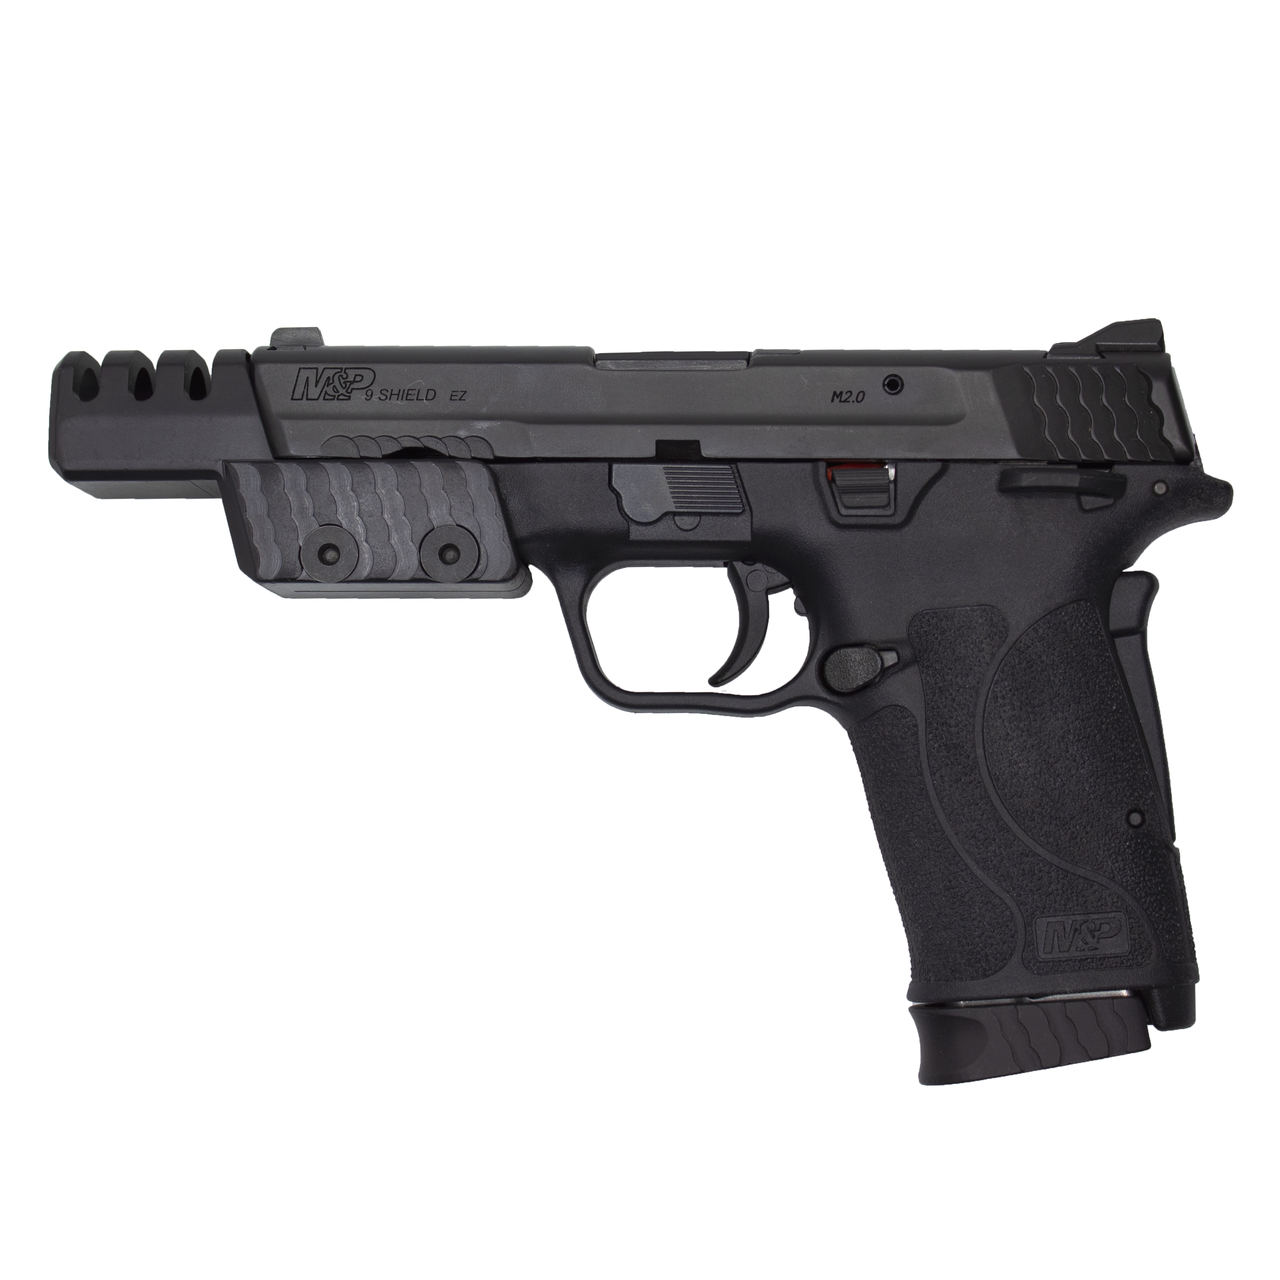 can the S&W M&P 9 shield be converted to the EZ model